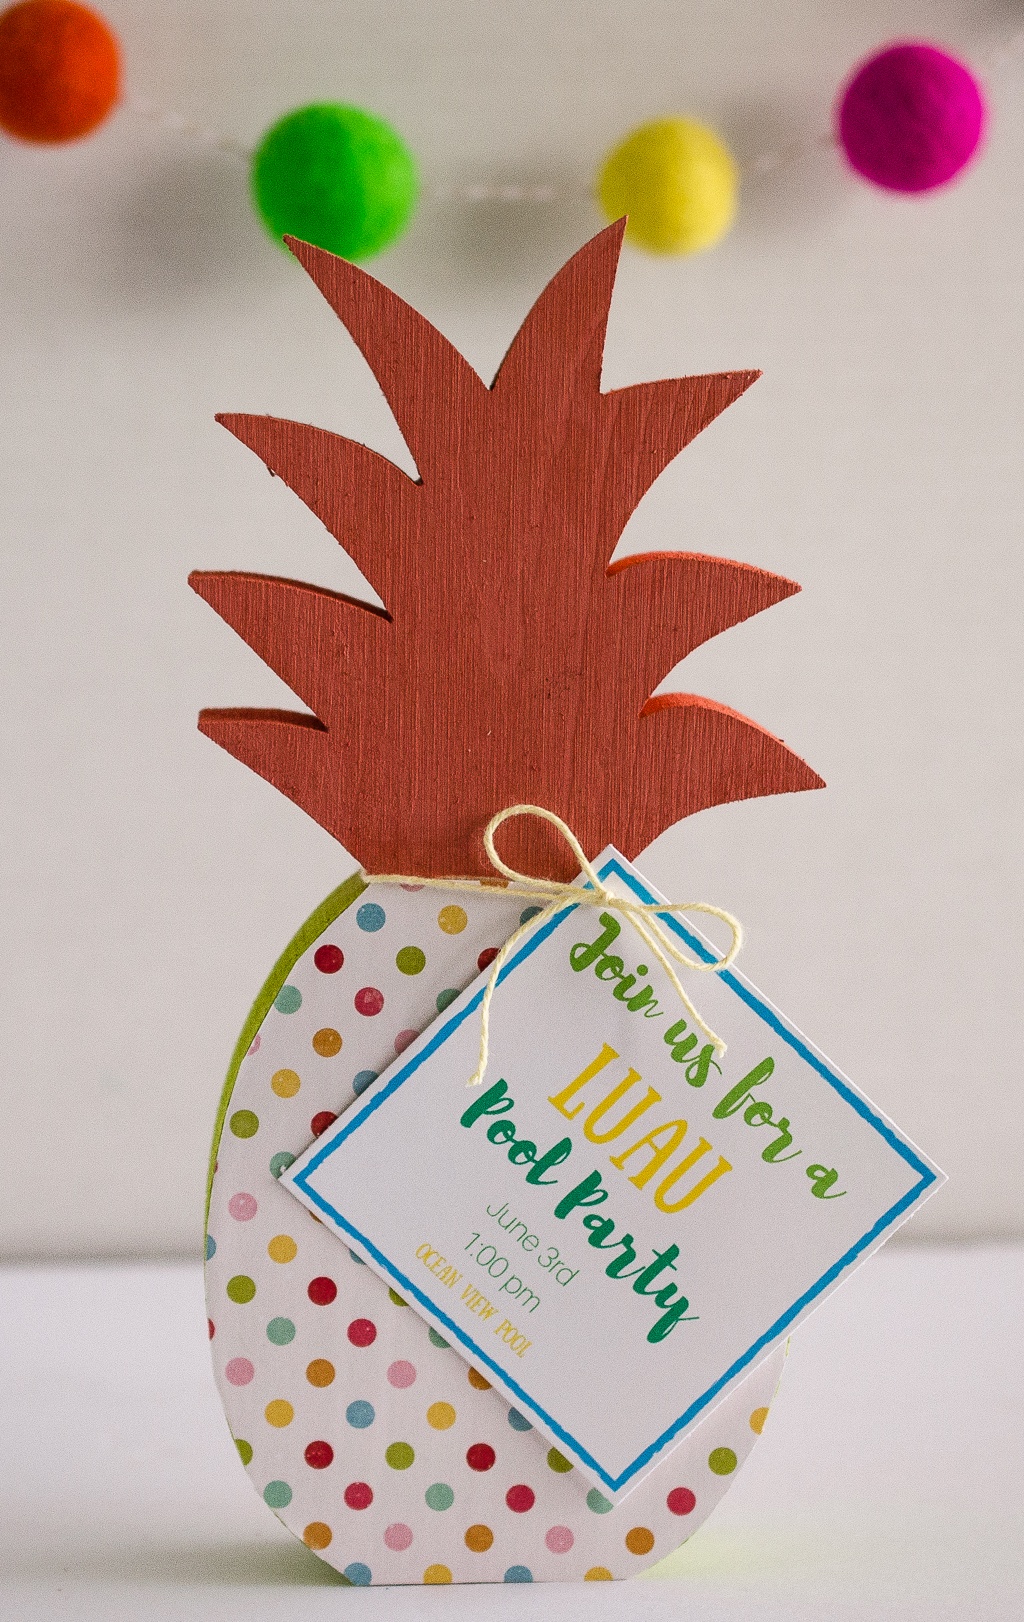 DIY Luau Pool Party Invites by Fawn Prints on Love the Day